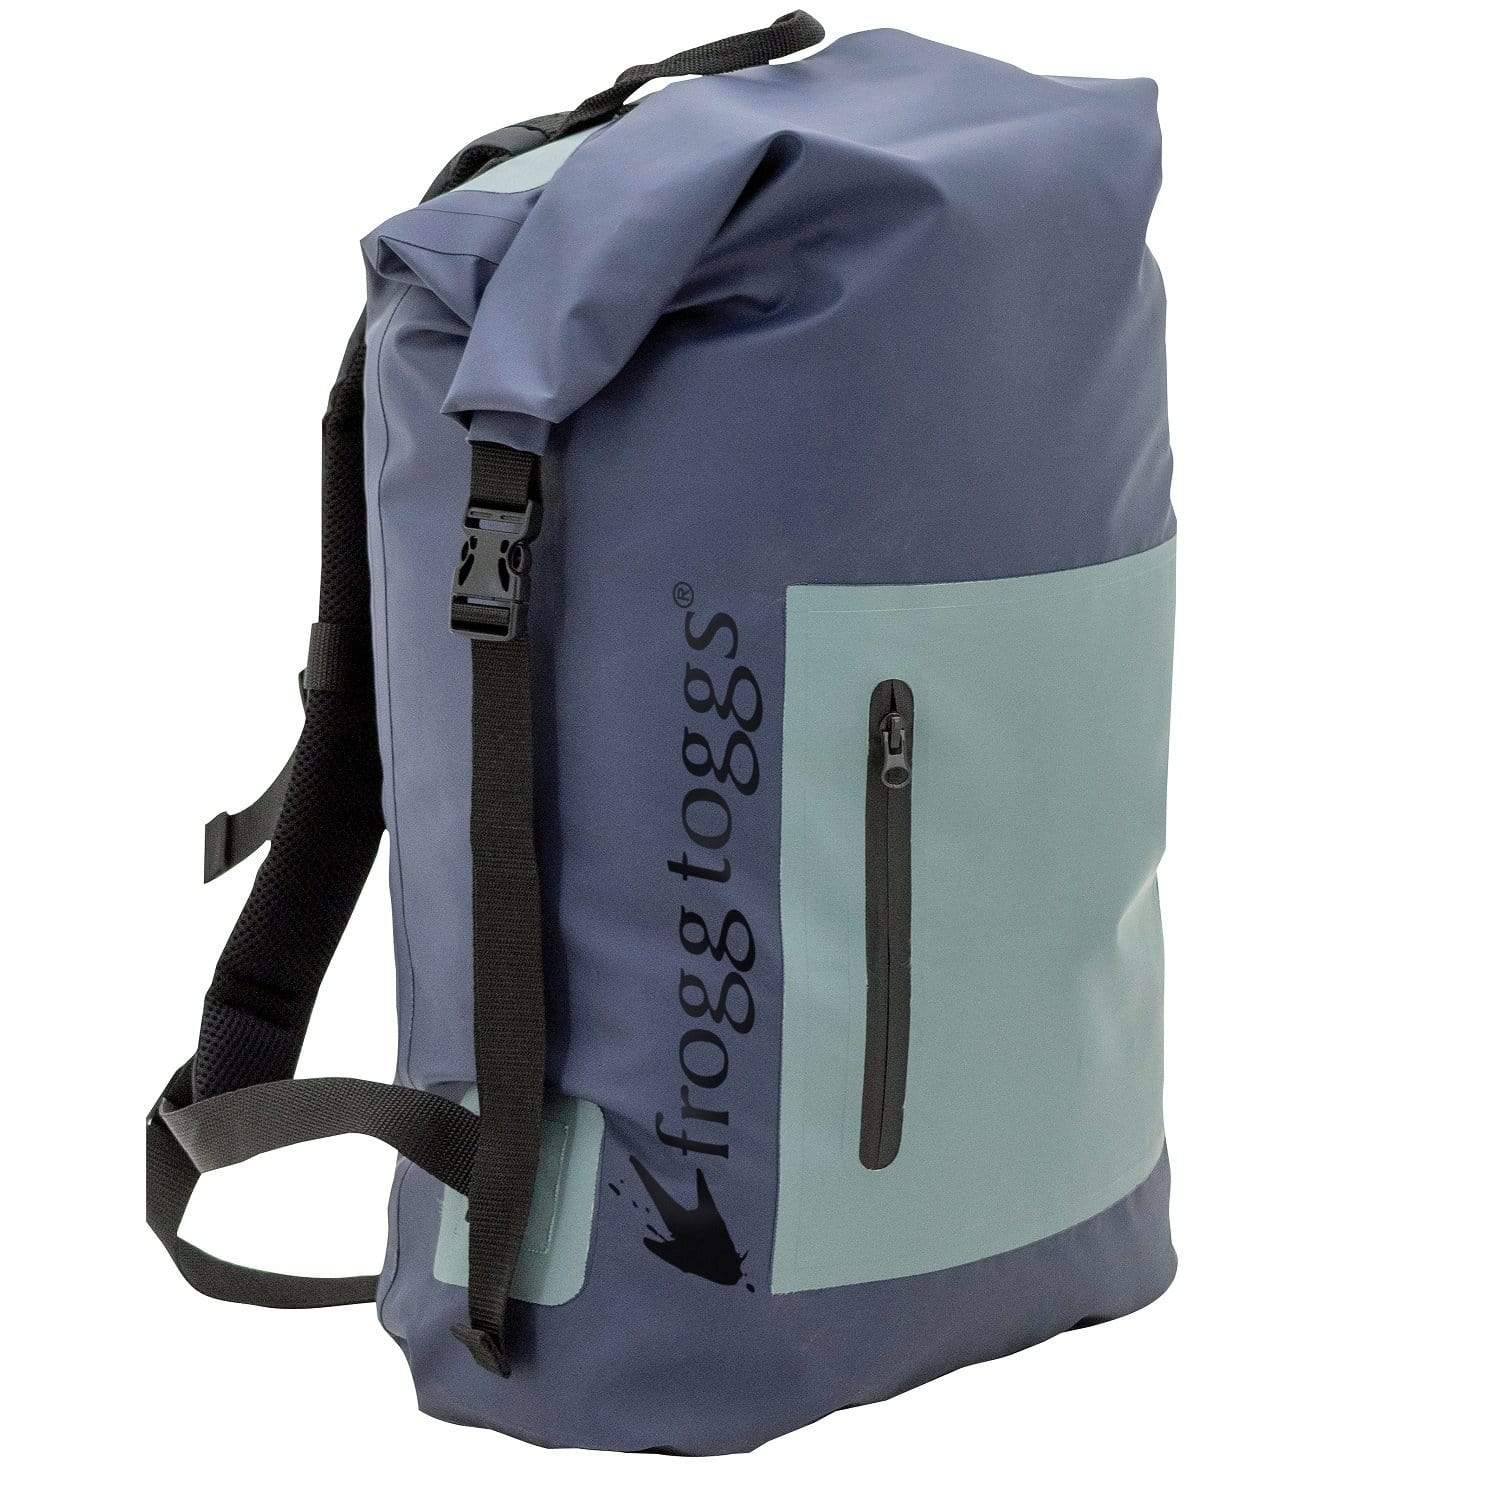 Frogg Toggs Camping & Outdoor : Backpacks & Gearbags Frogg Toggs PVC Tarpaulin Waterproof Backpack Blue